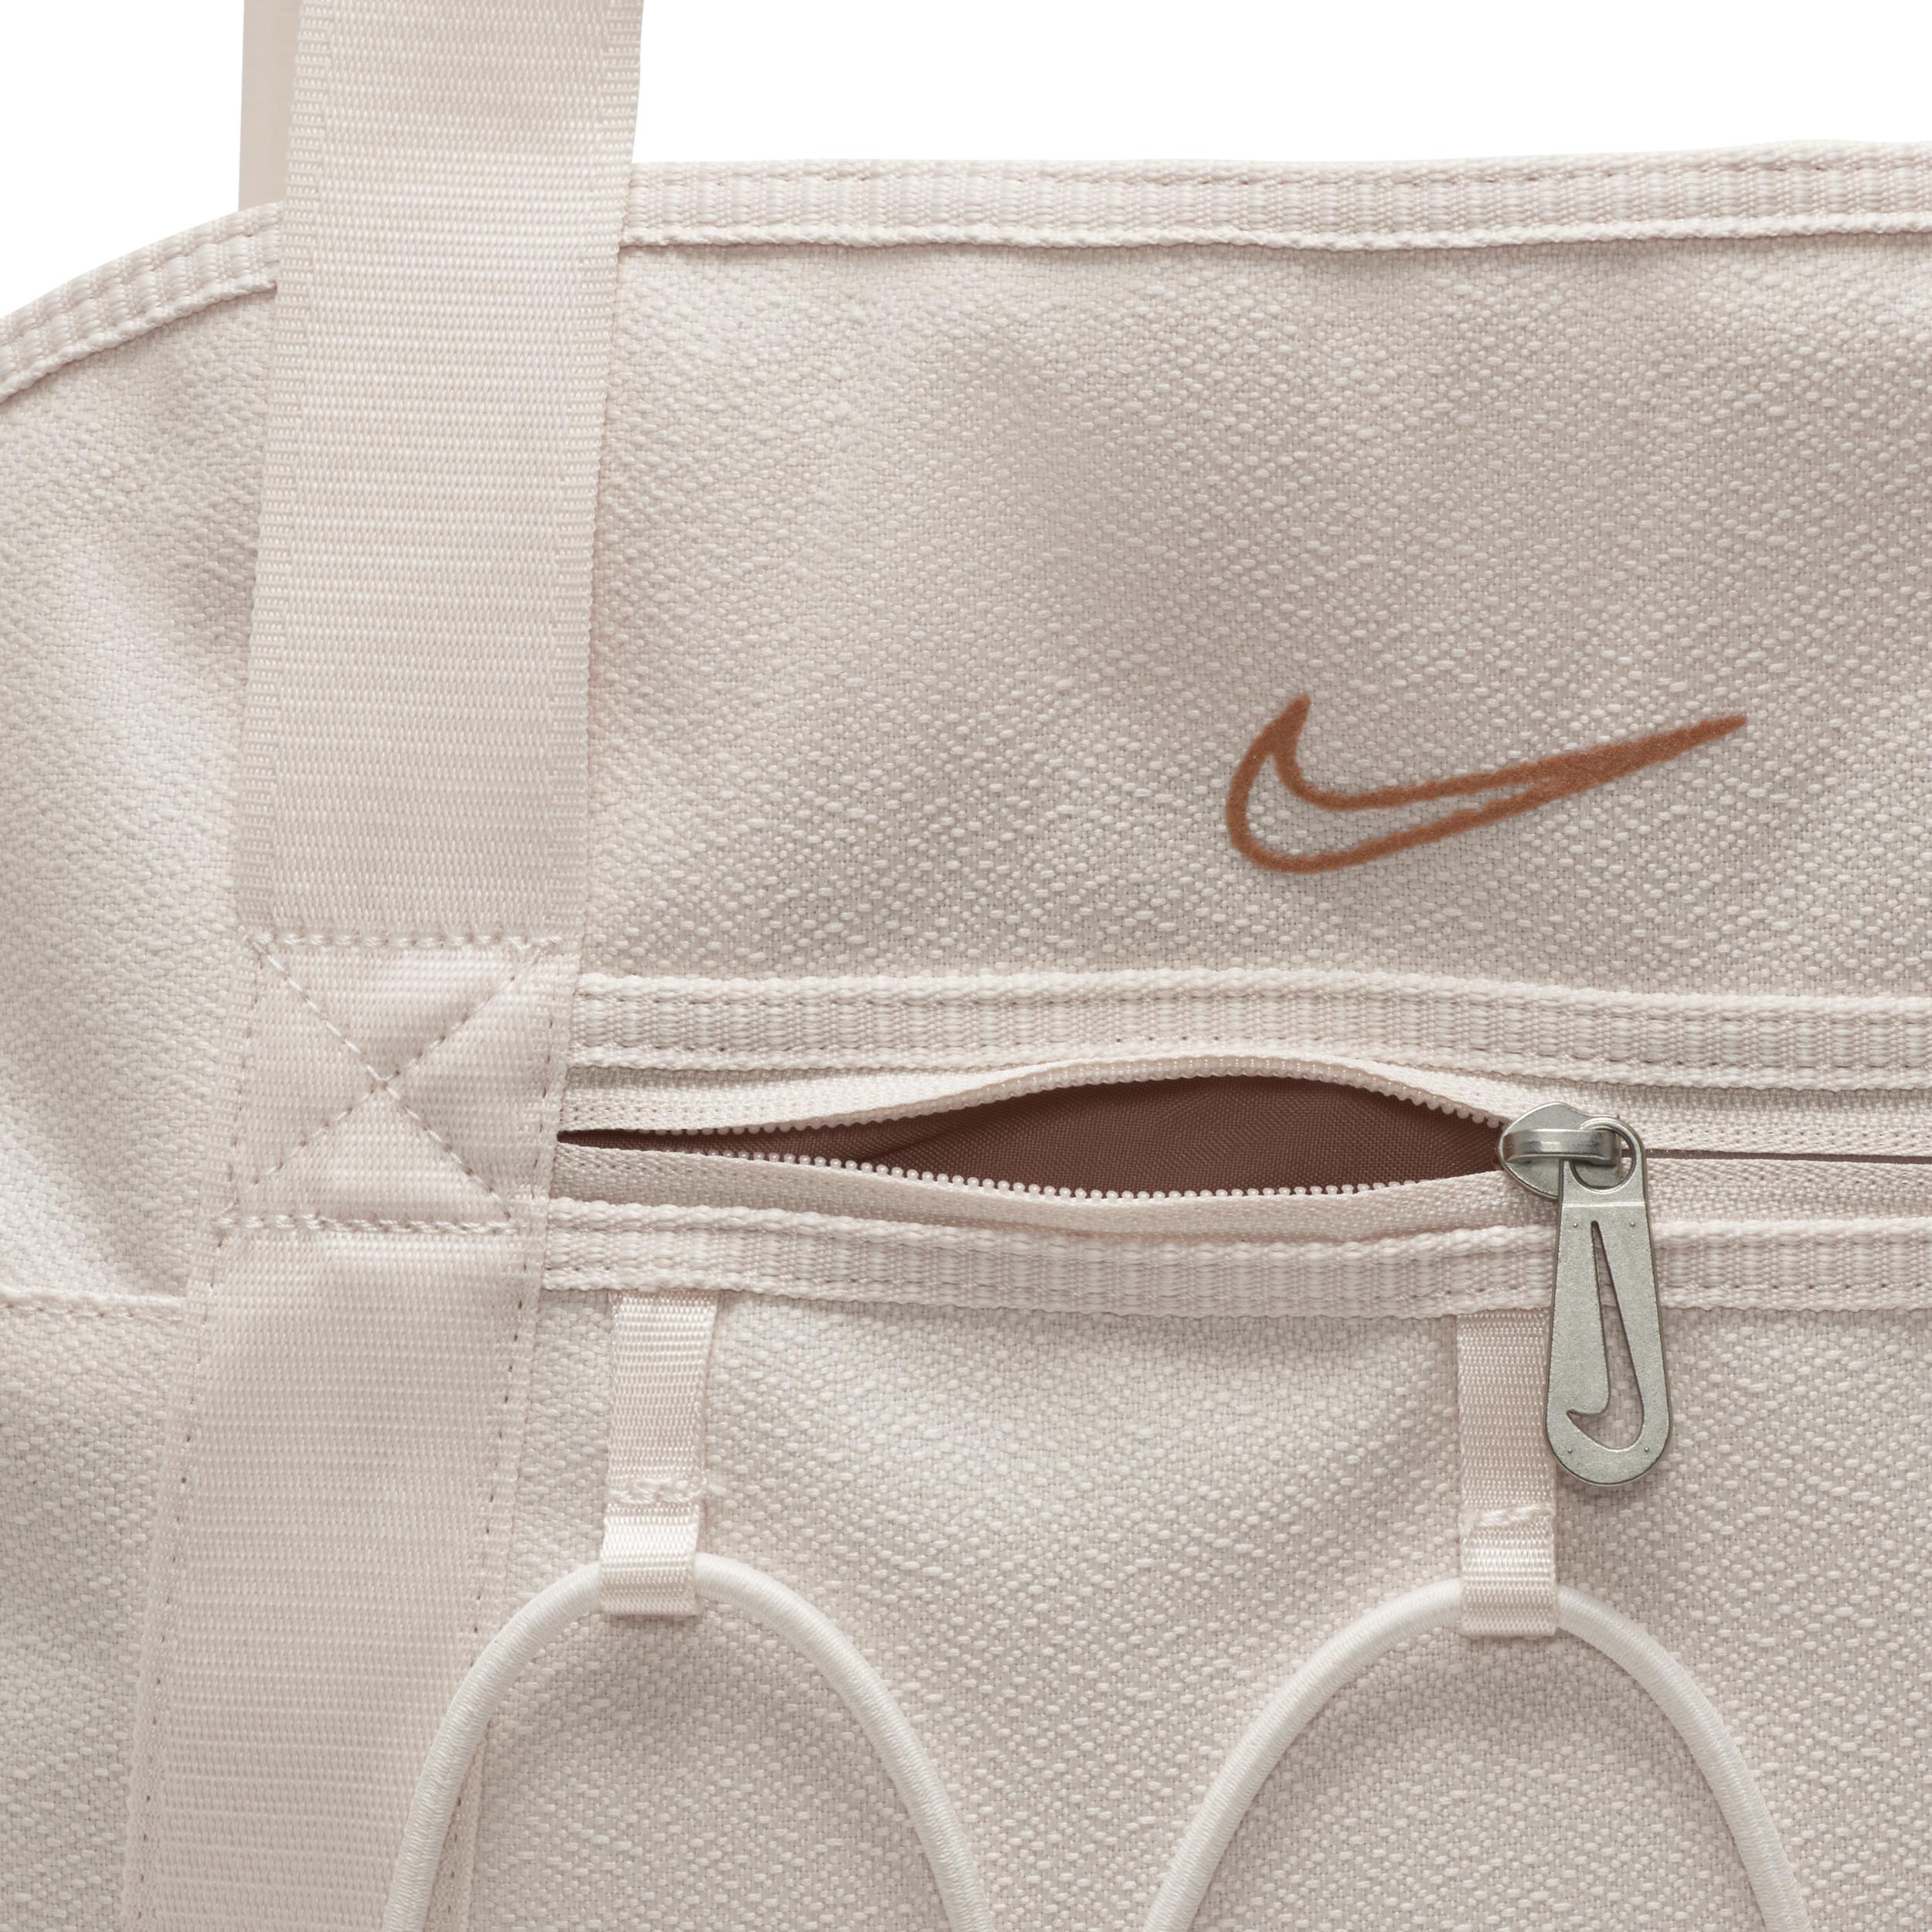 Nike Women's One Training Tote Bag (18L) in Brown - ShopStyle